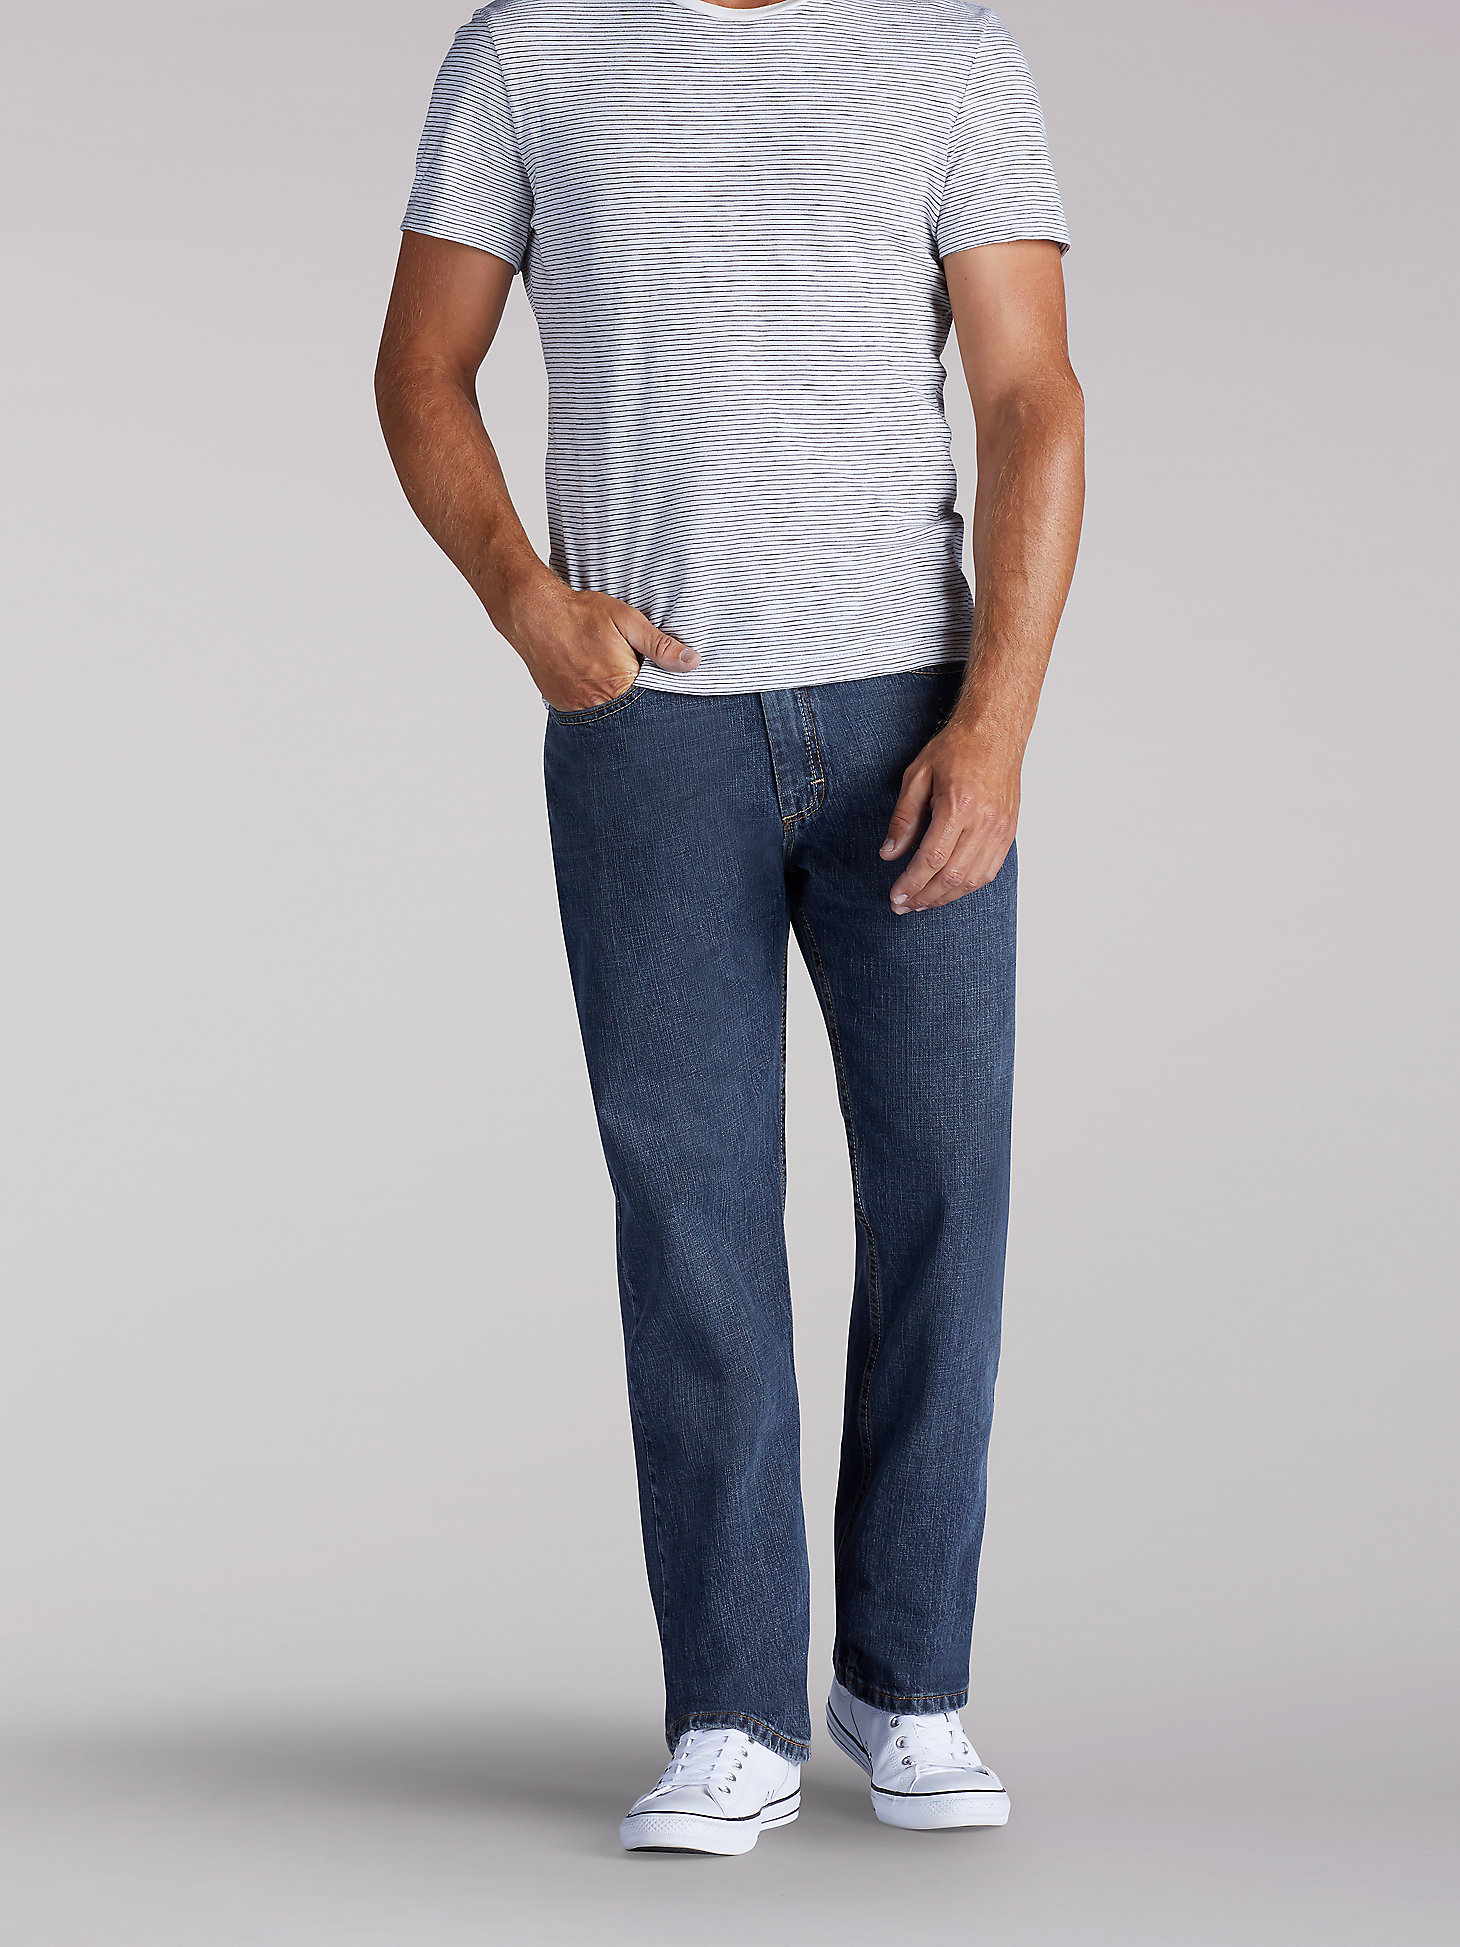 Men’s Premium Select Relaxed Straight Leg Jeans in Calypso main view